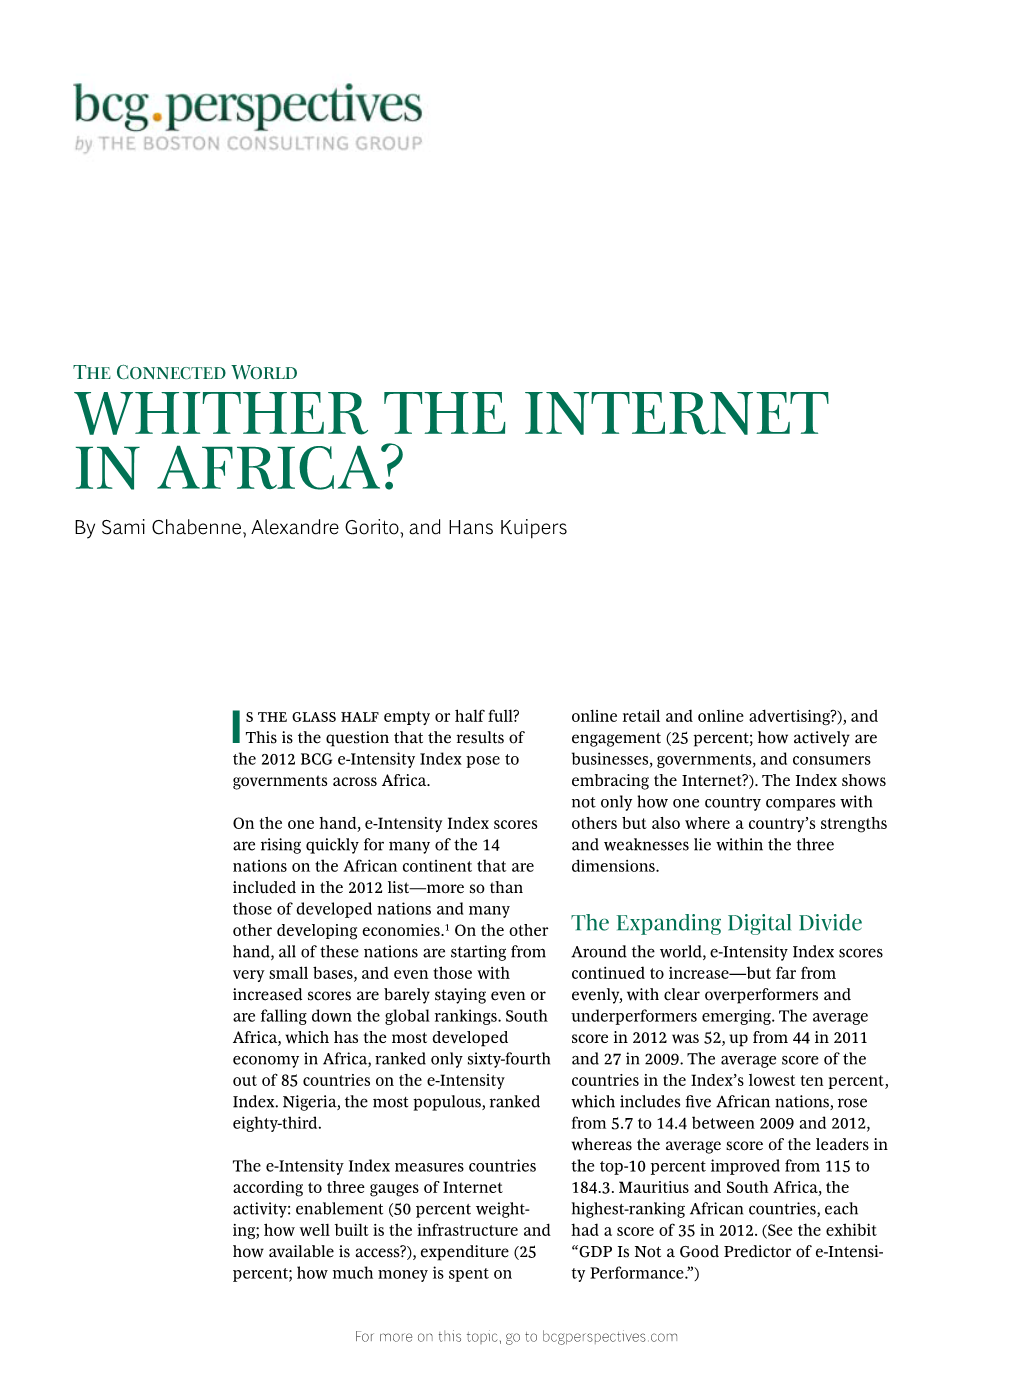 Whither the Internet in Africa? by Sami Chabenne, Alexandre Gorito, and Hans Kuipers